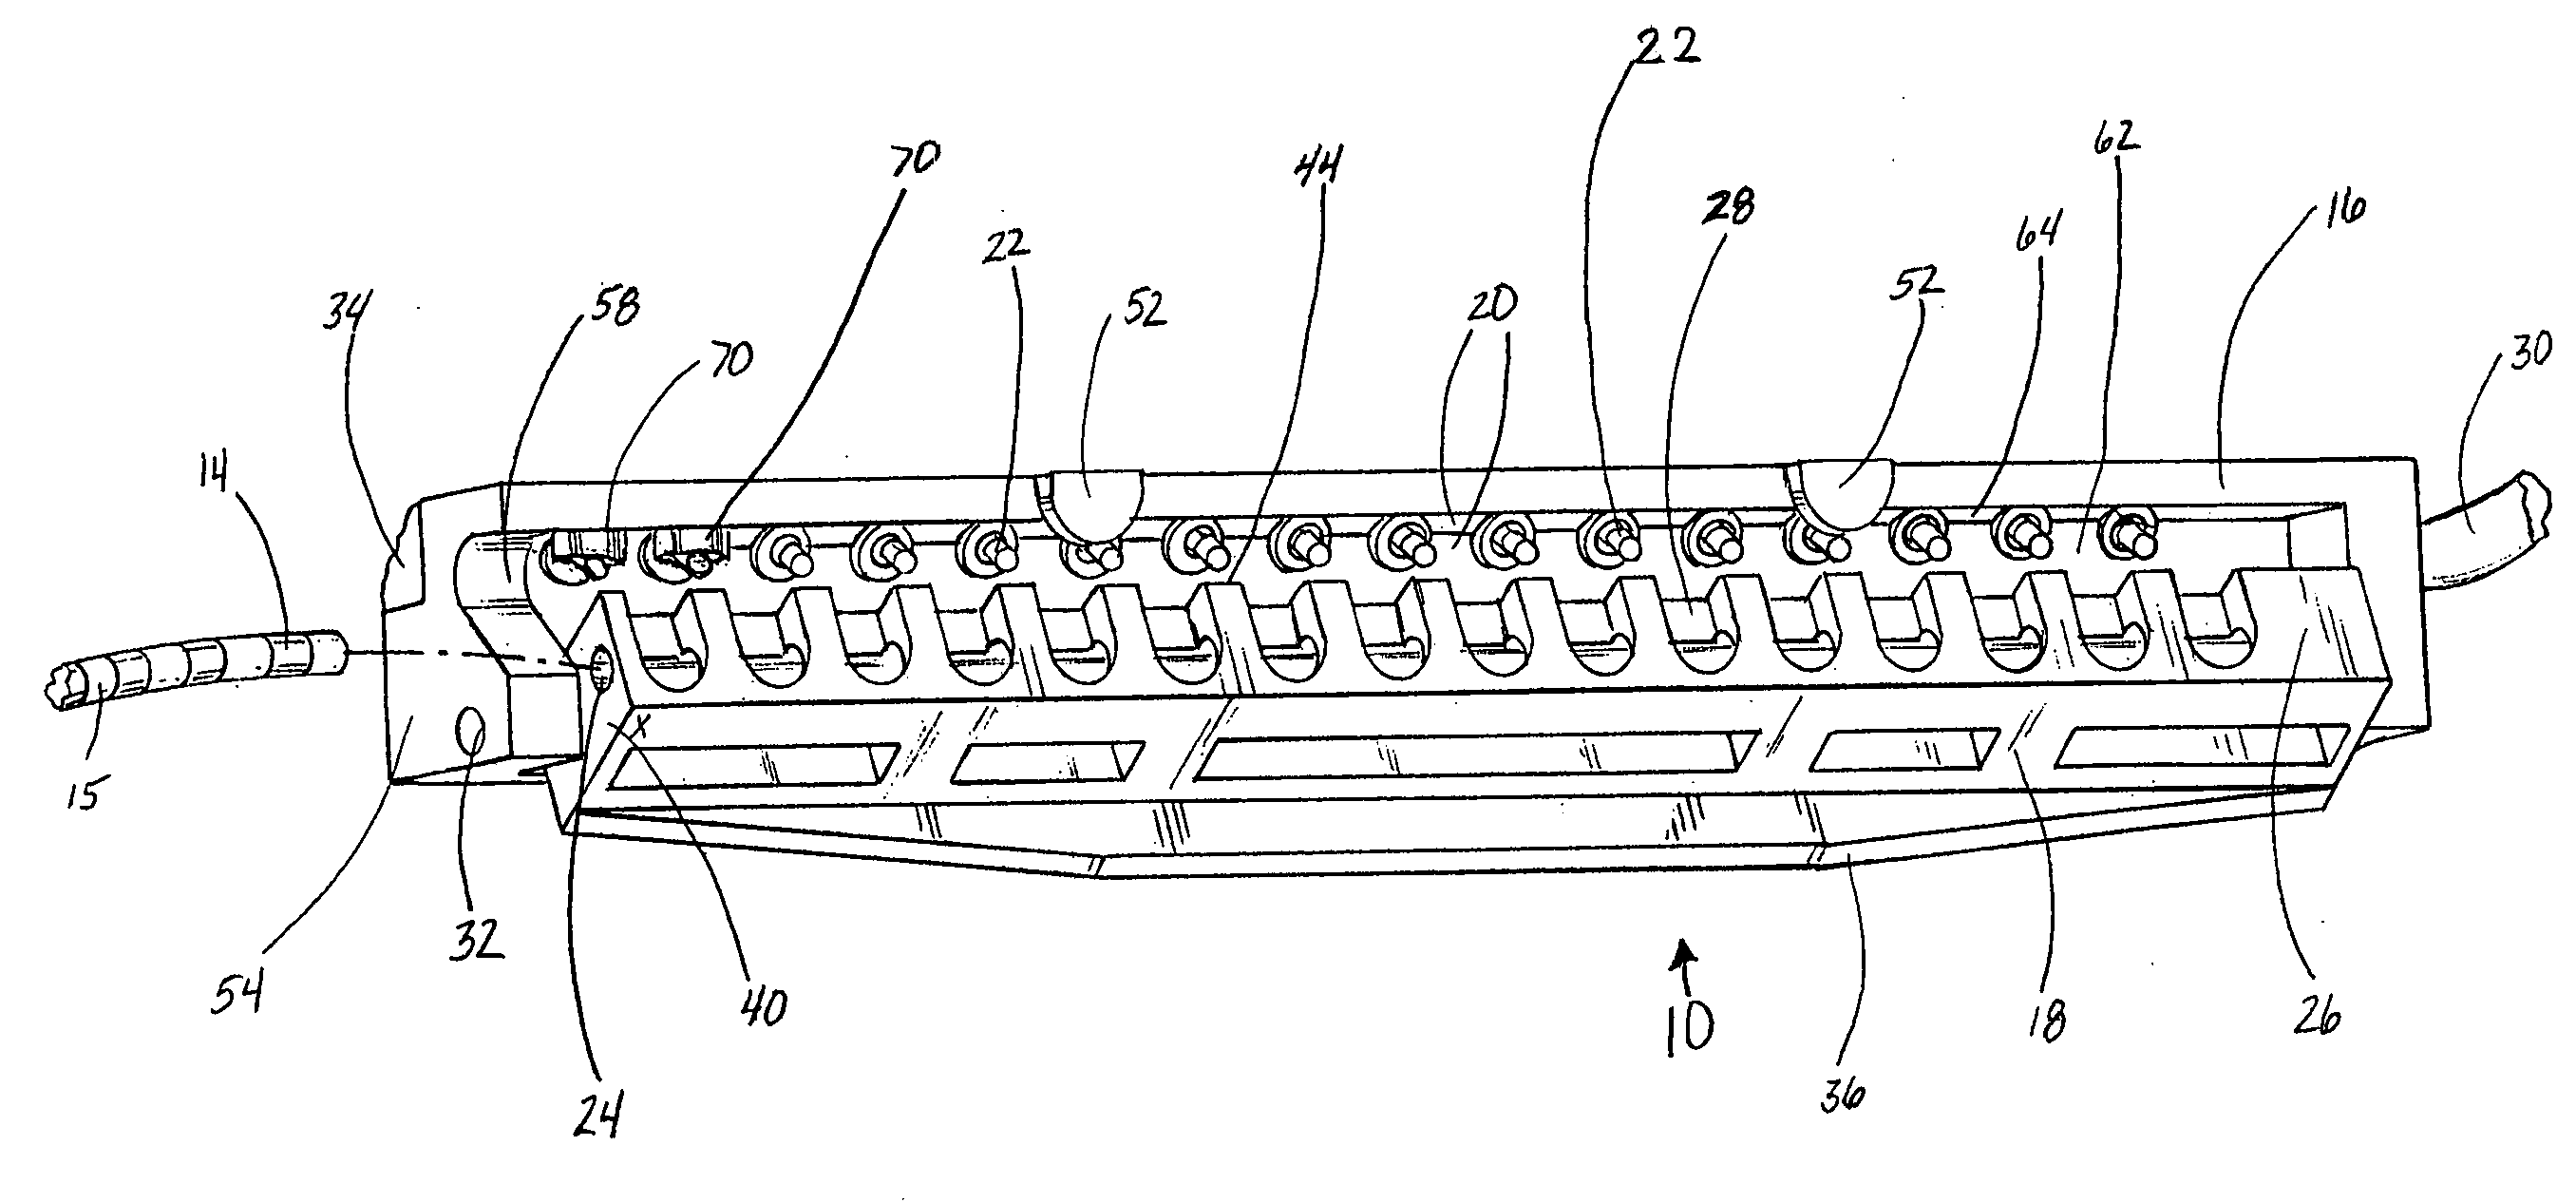 Electrical Connector with Canopy for an In-Body Multi-Contact Medical Electrode Device